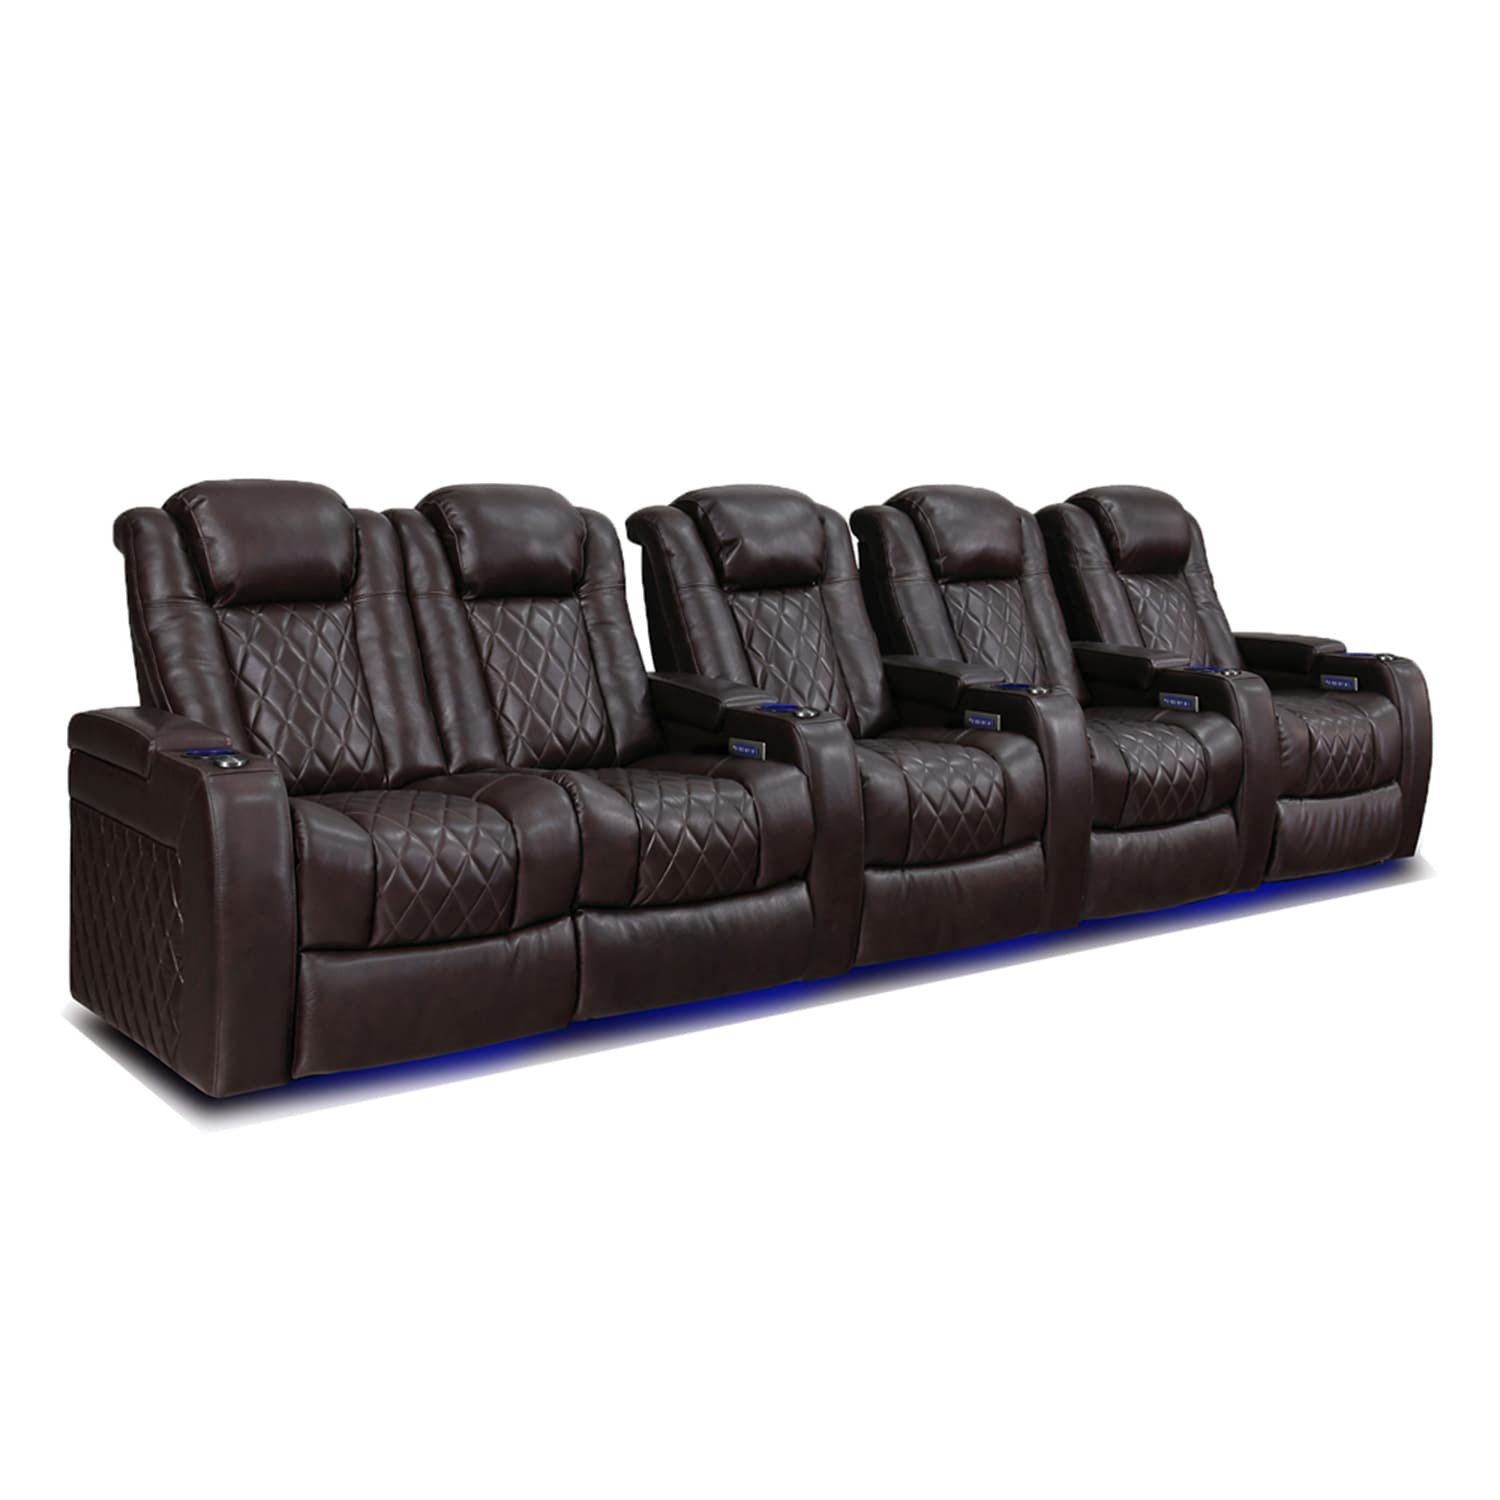 Valencia Tuscany Top Grain Nappa 11000 Leather Home Theater Seating Power Recliner Row Of 5 Loveseat Left Dark Chocolate